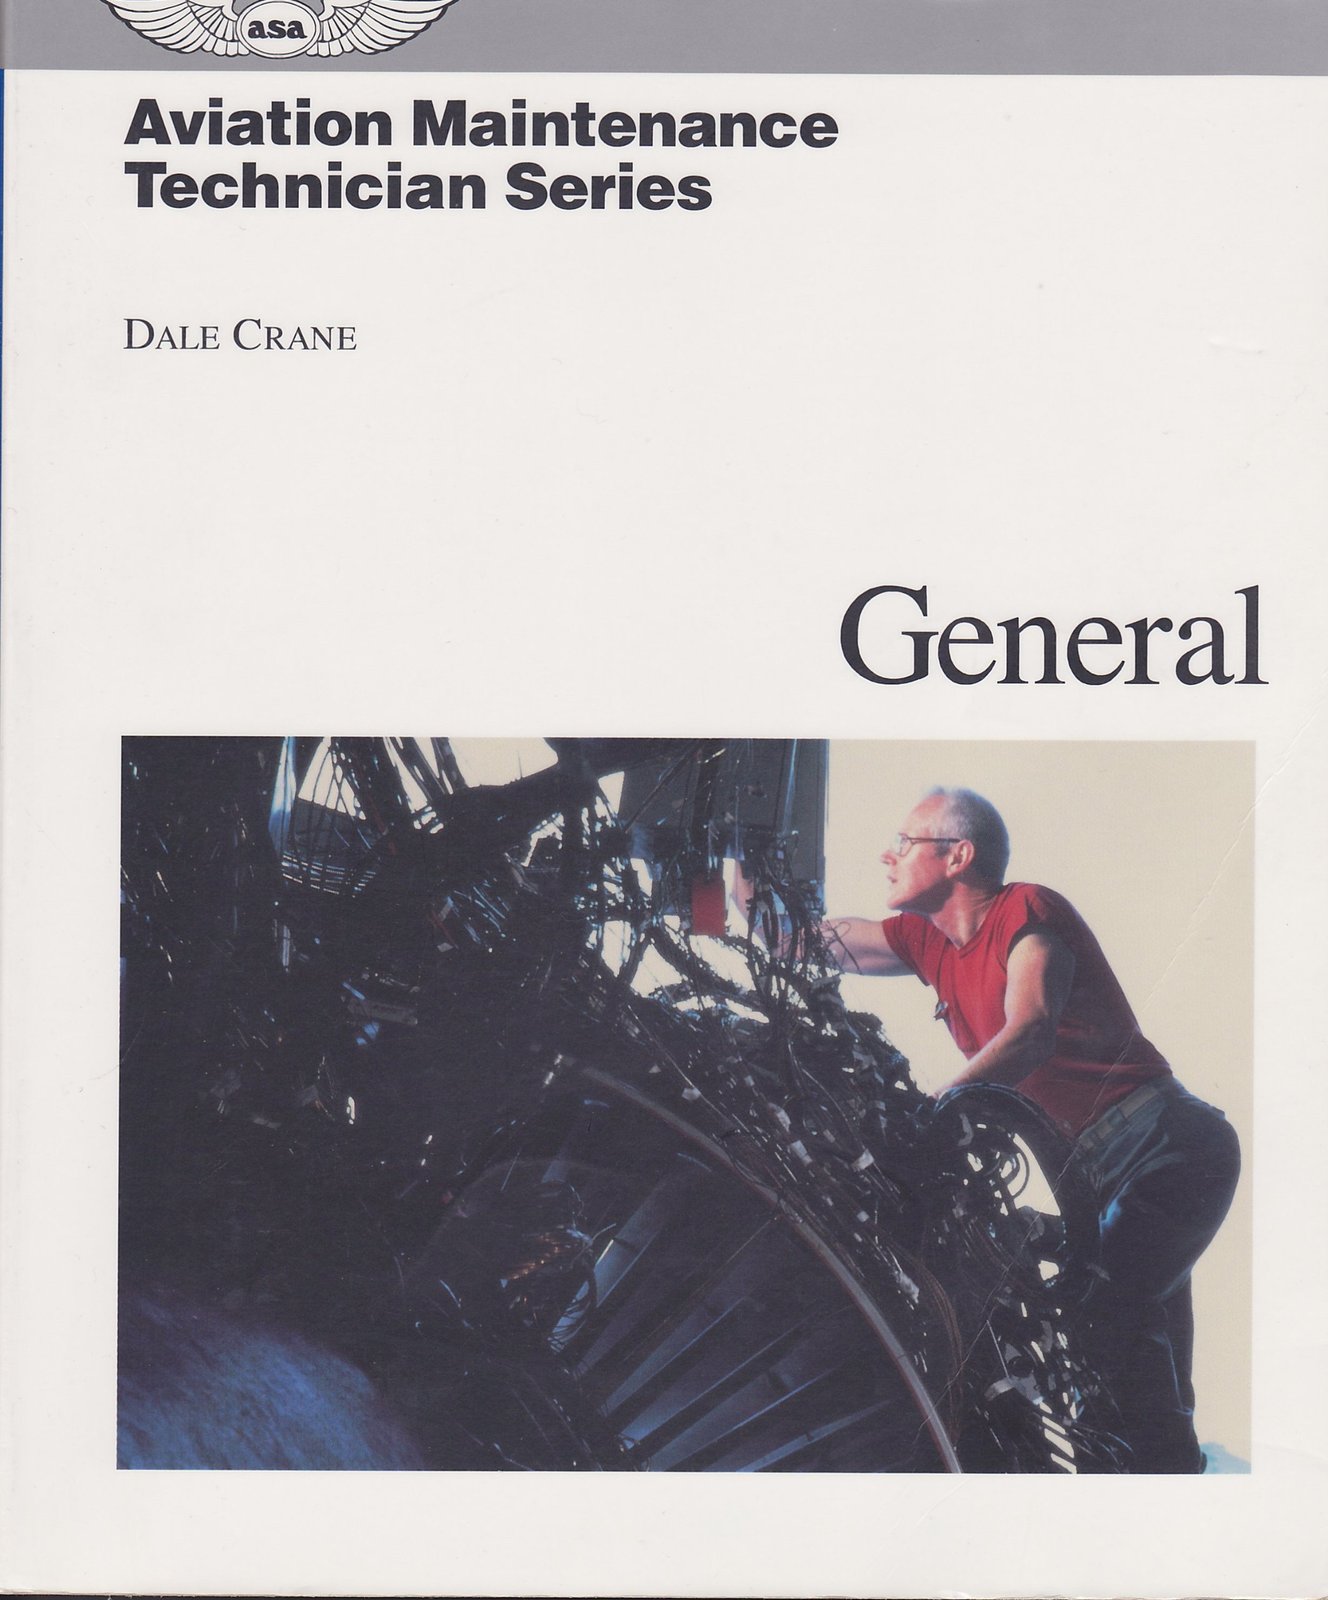 Primary image for General (Aviation Maintenance Technician Series) [Paperback] Crane, Dale